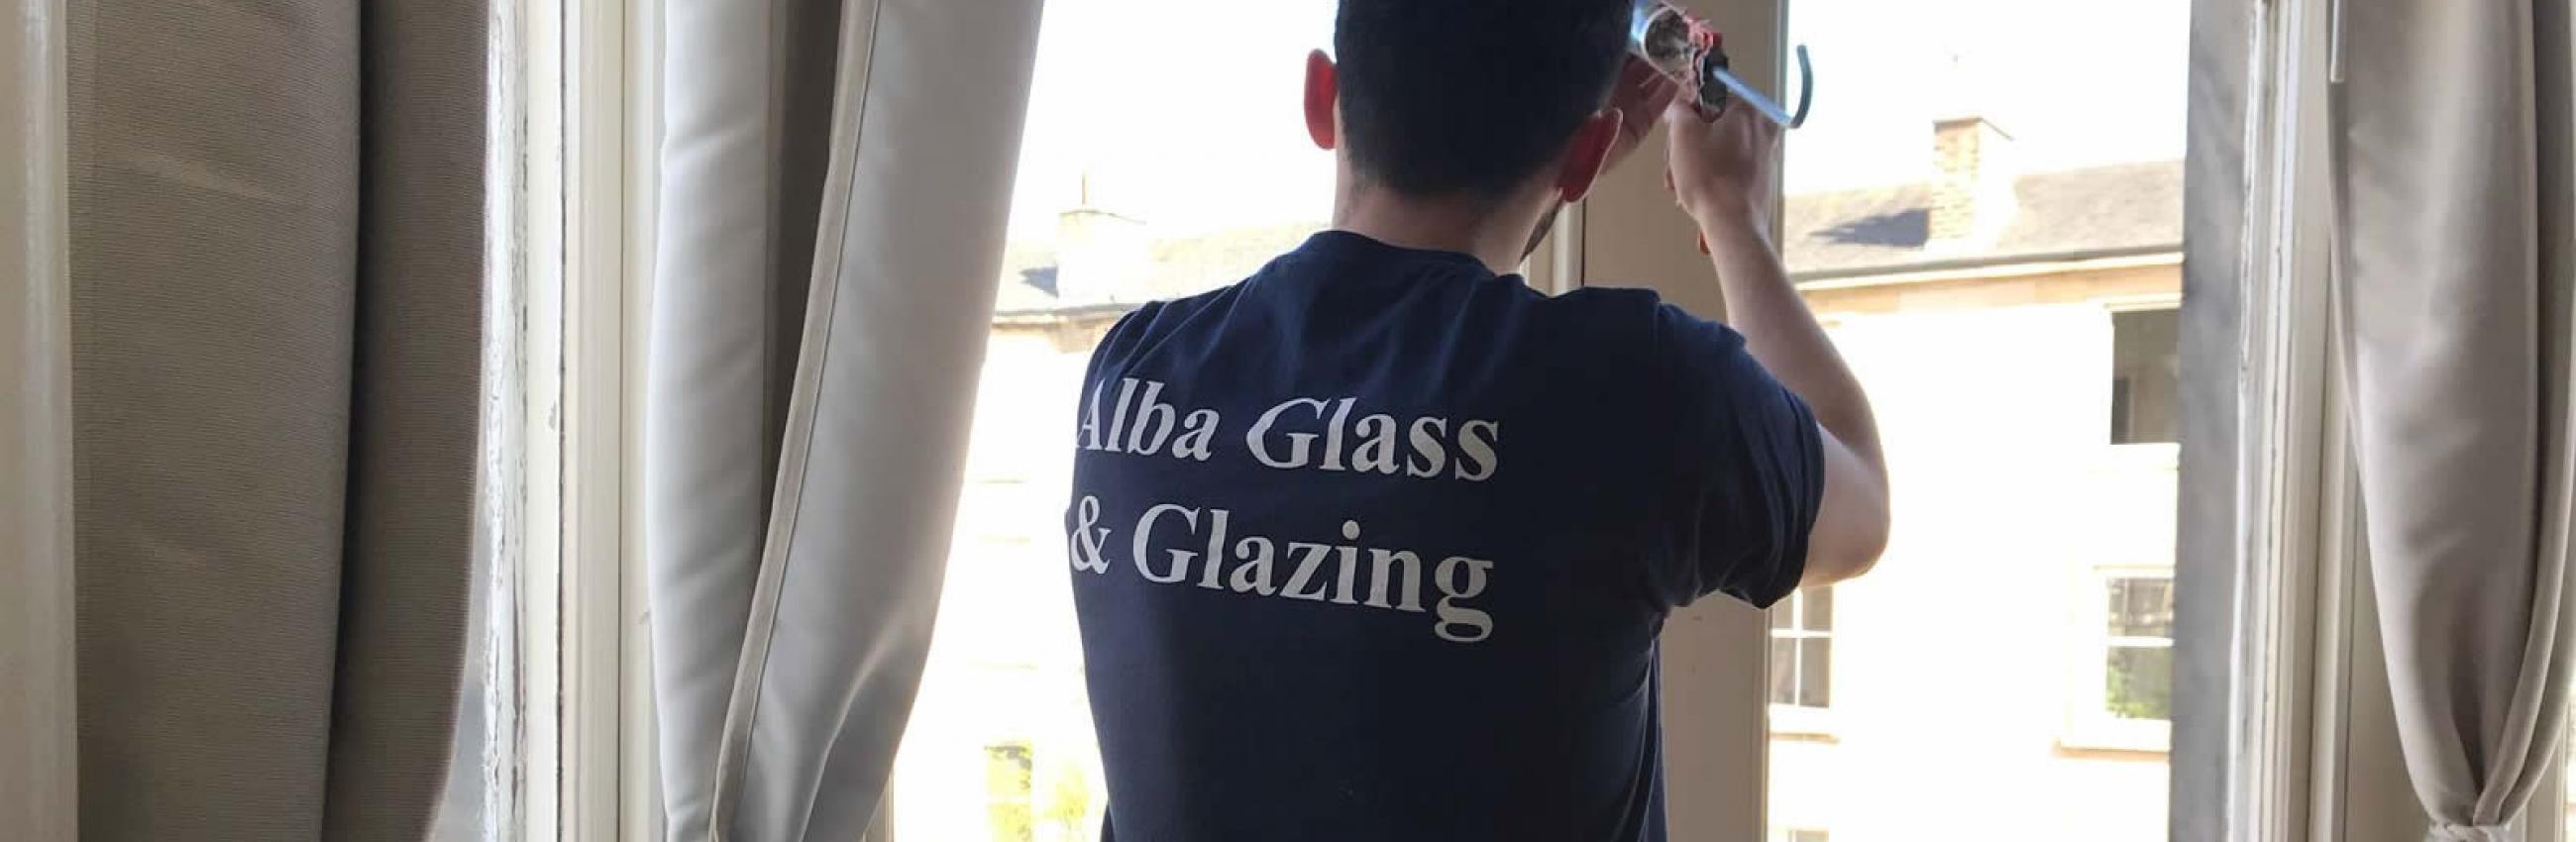 Alba Glass and Glazing Draught Proofing